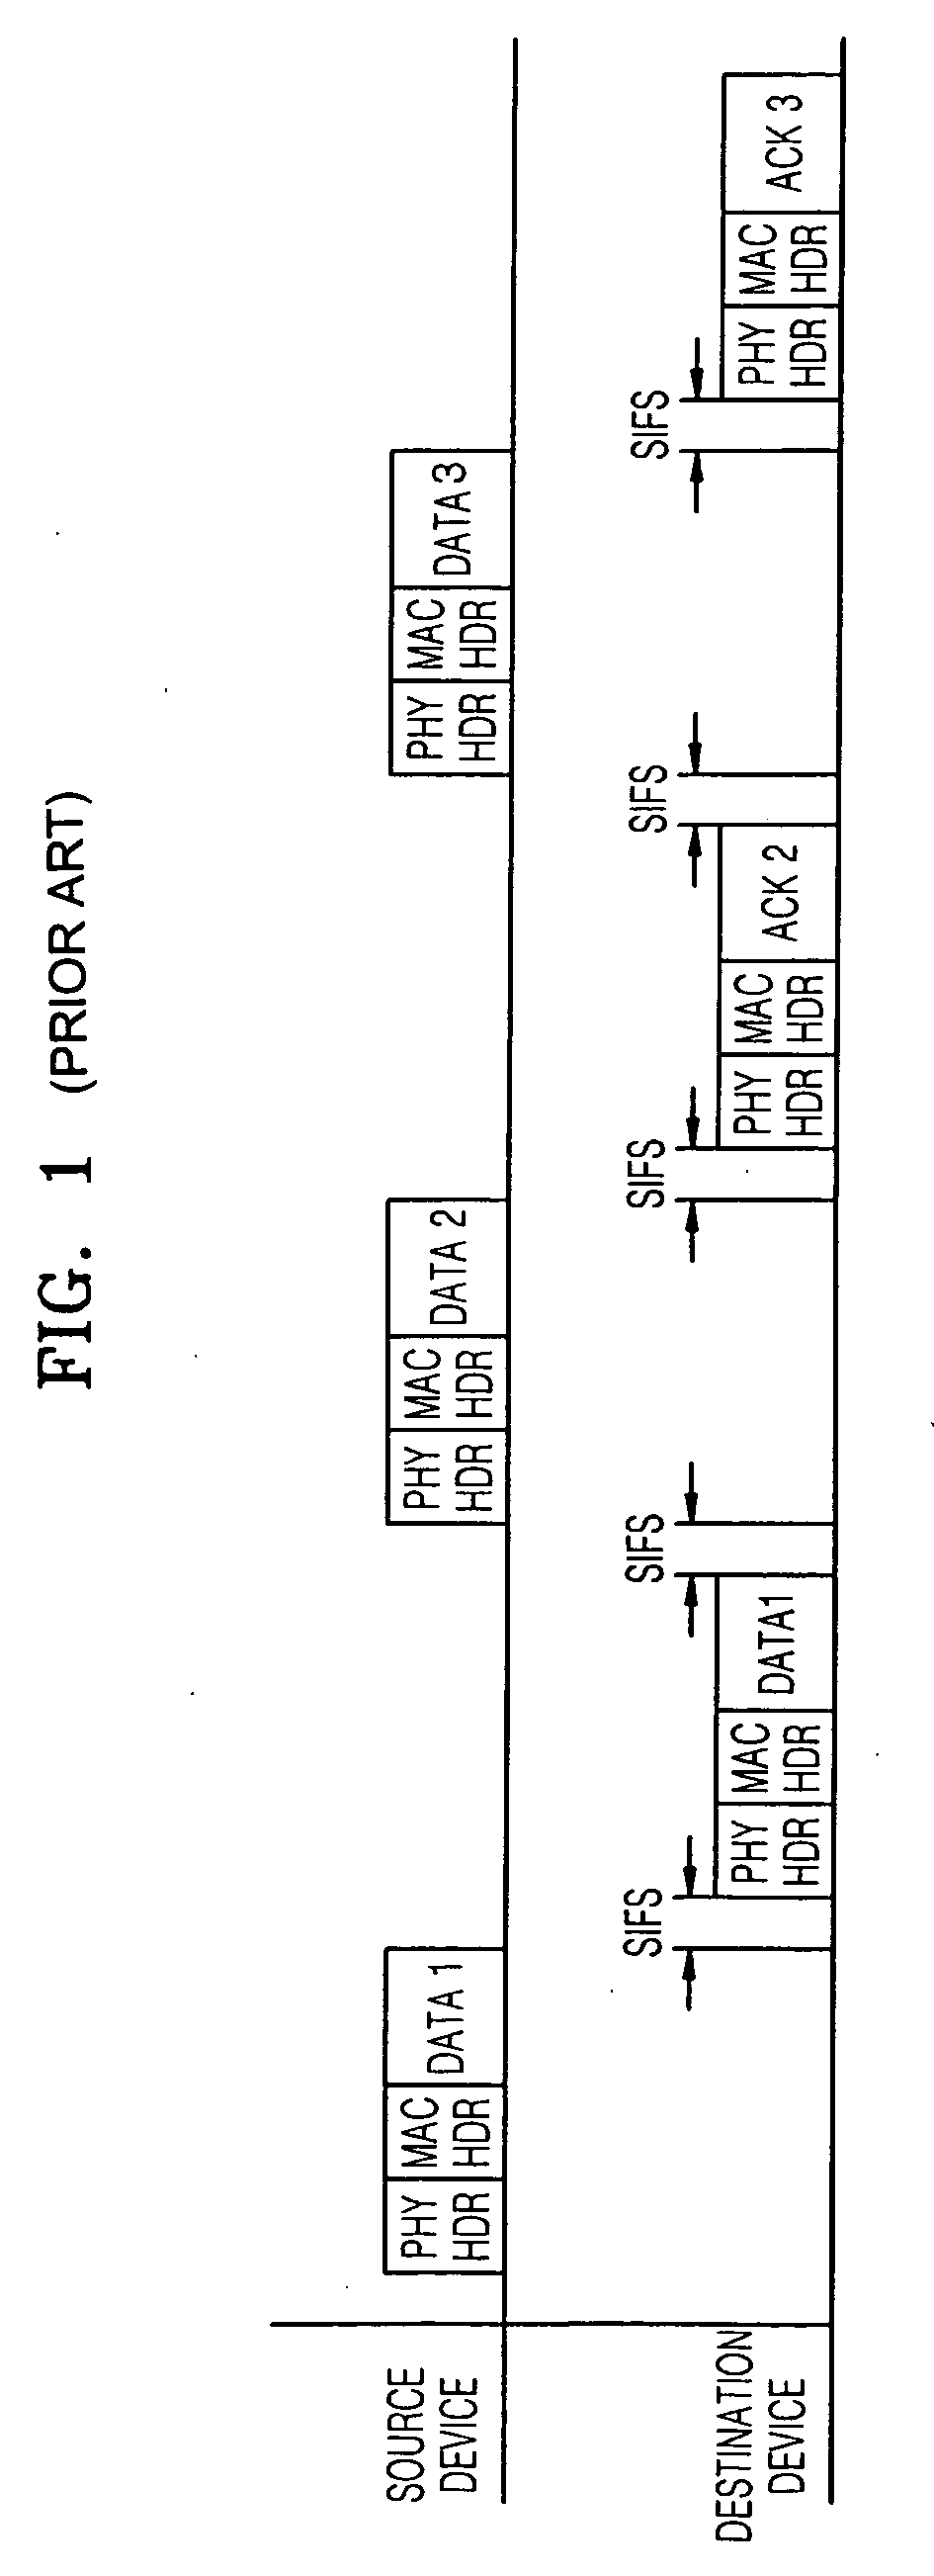 Method and apparatus to transmit and/or receive data via wireless network and wireless device